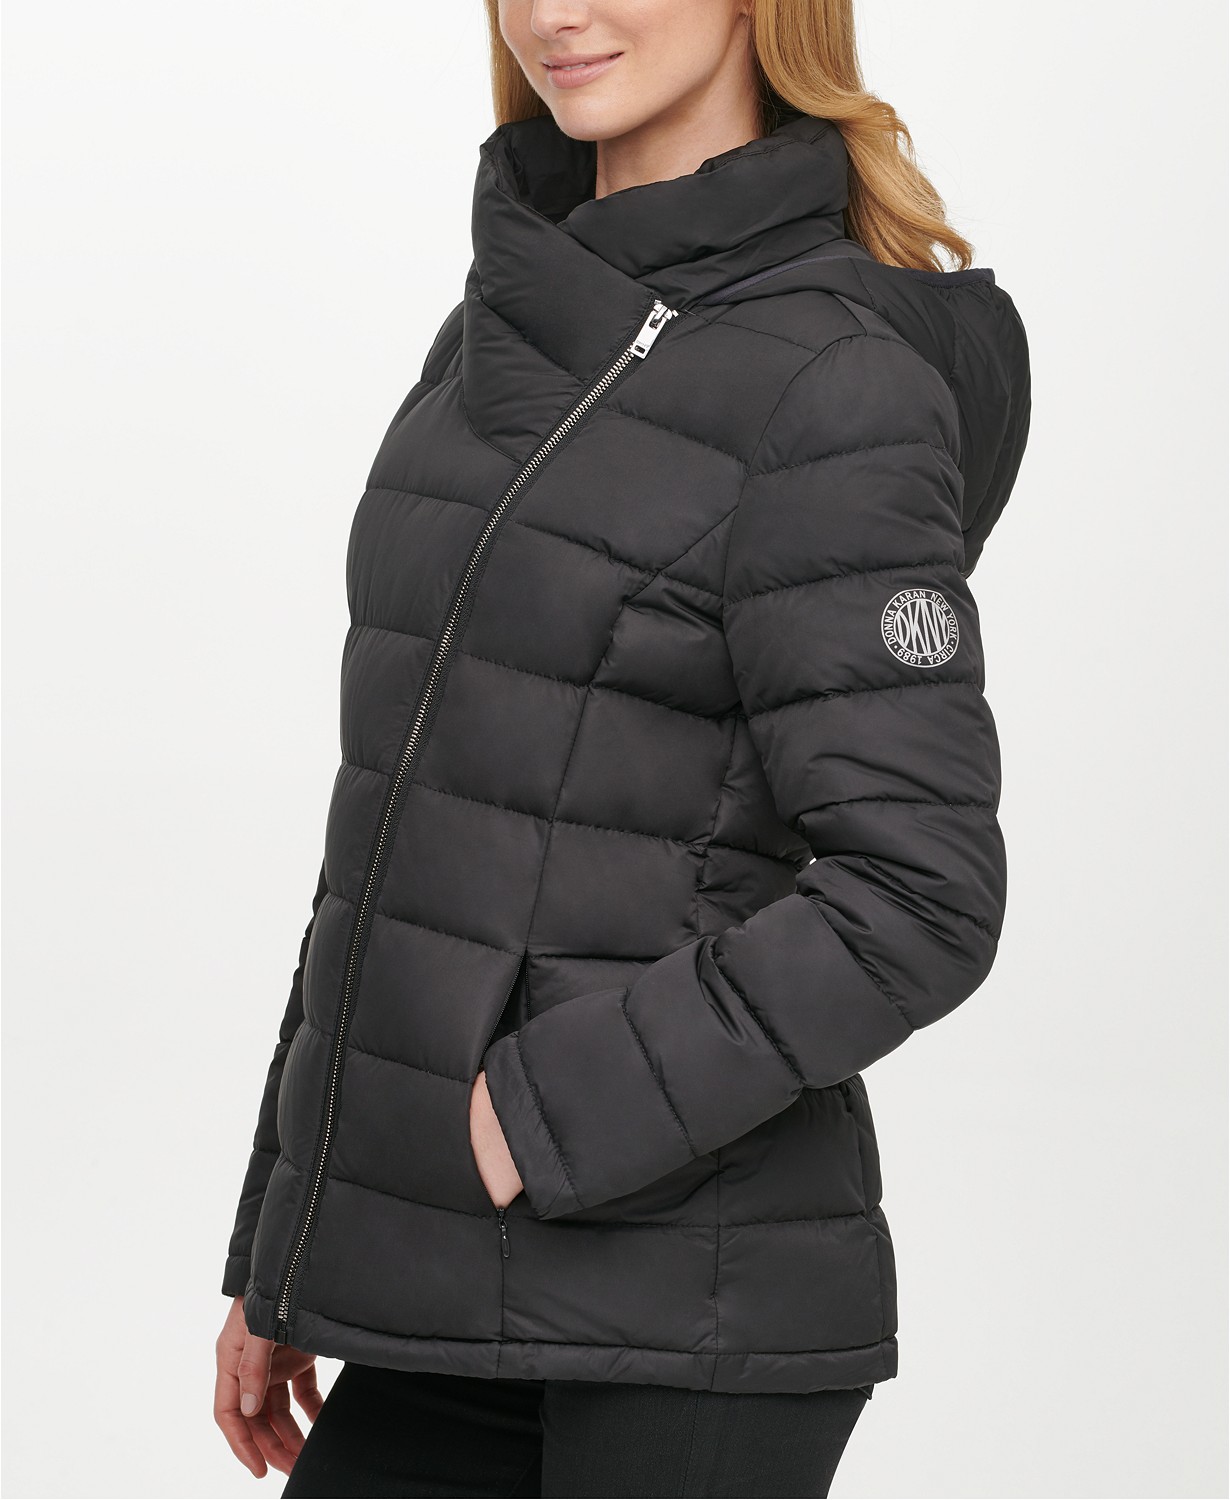 www.couturepoint.com-dkny-womens-black-asymmetrical-hooded-packable-down-puffer-coat